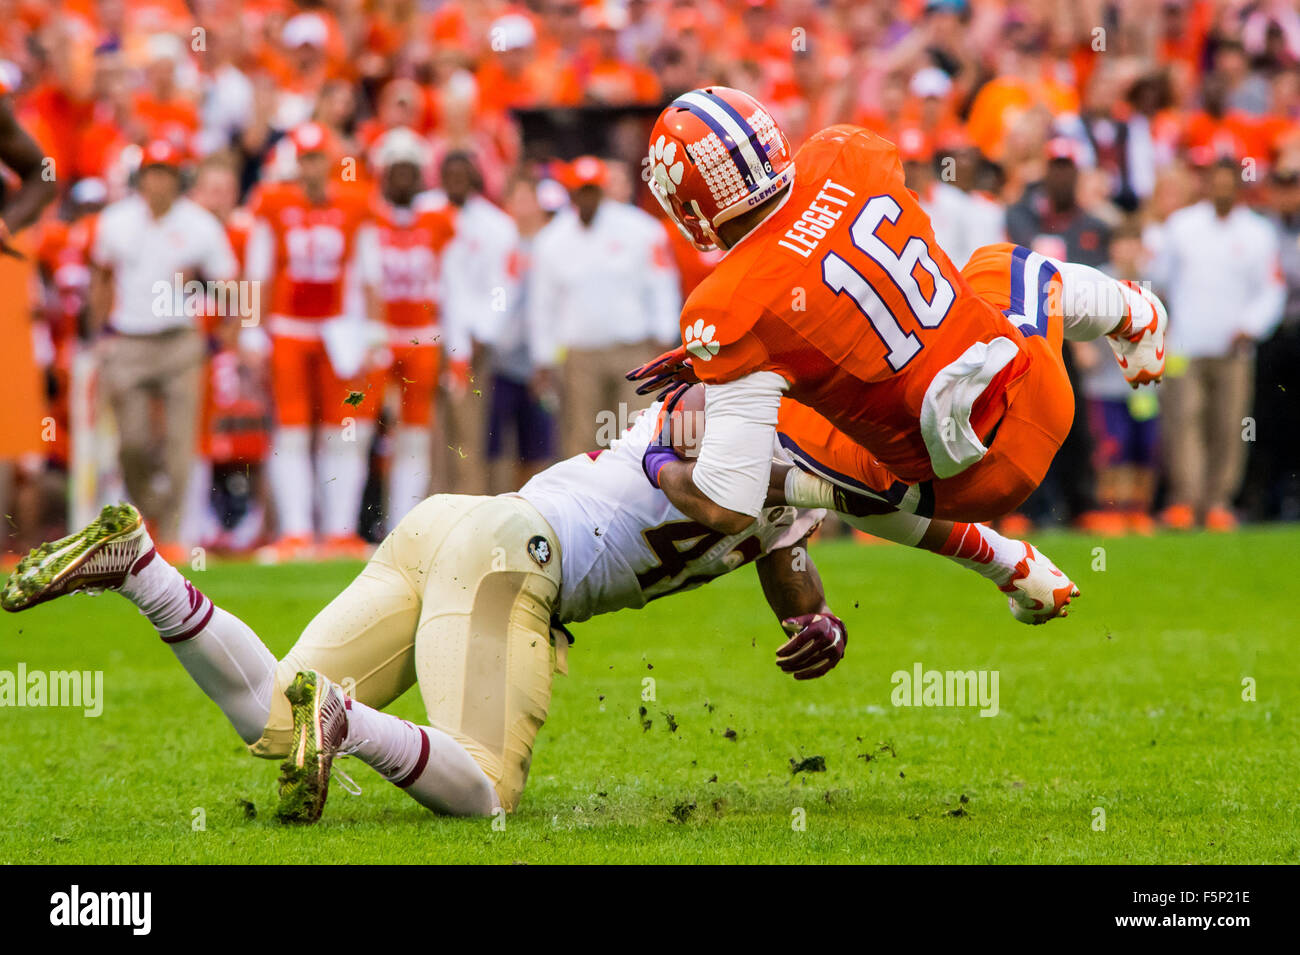 Clemson Tigers tight end Jordan Leggett (16) is tackled by Florida State  Seminoles defensive back Lamarcus Brutus (42) during the NCAA Football game  between Florida State and Clemson at Death Valley in